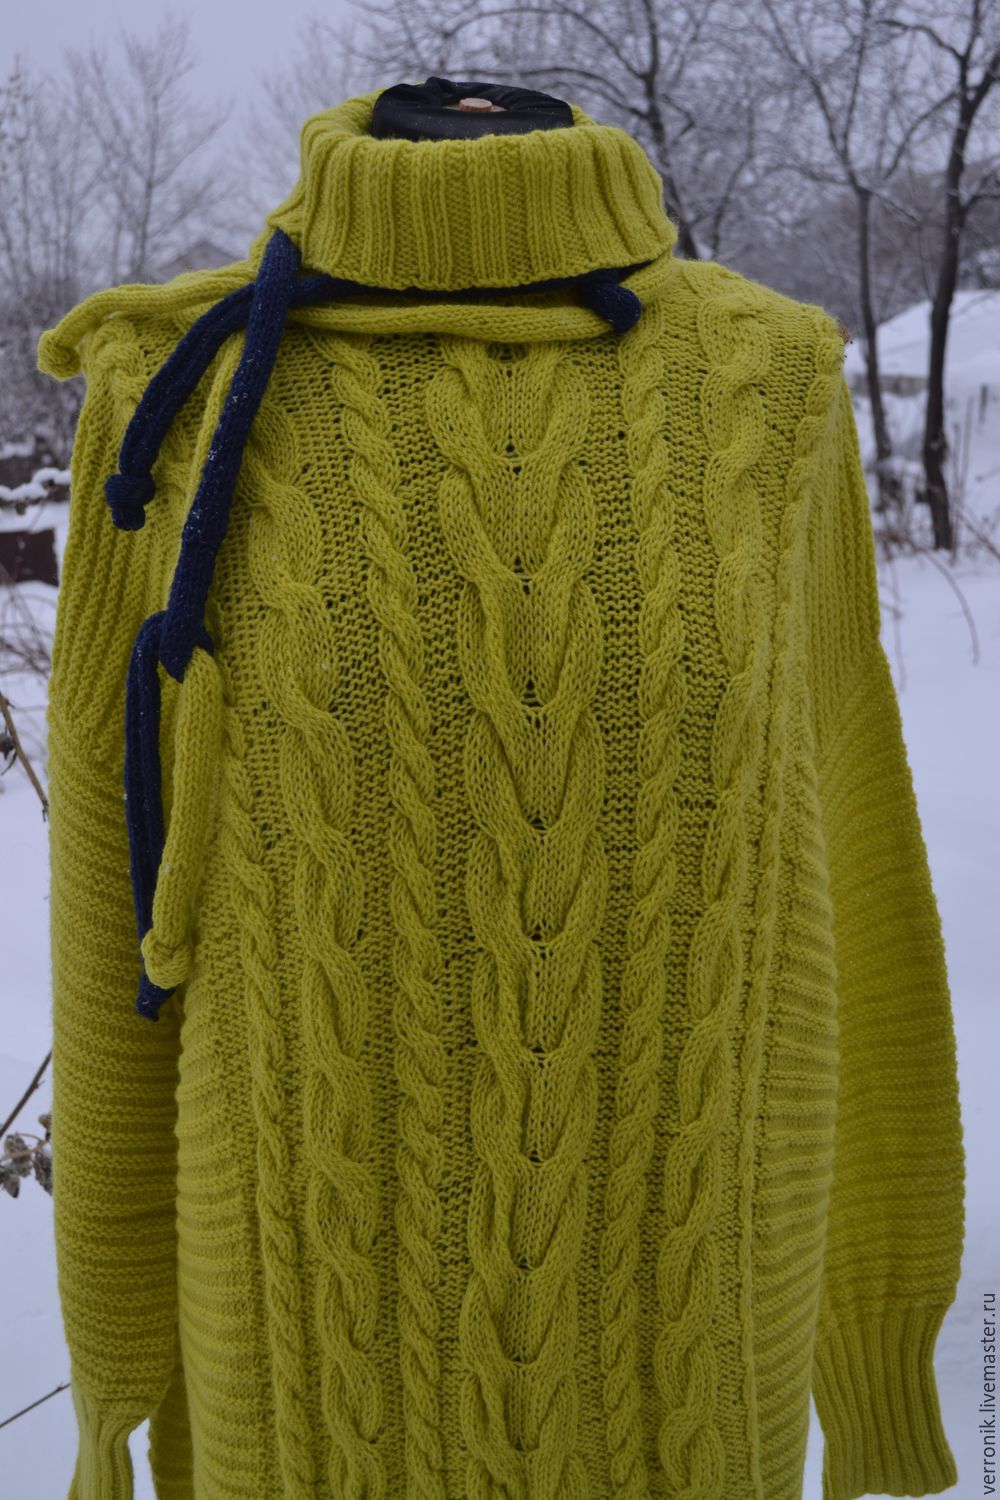 Sweater knitted. Sweatshirts and sweaters are handmade. Fair masters - handmade. Buy sweater knitted `Bright days`. Handmade.  Lemon. Shop masters of Dominica. Sweater knitted `Bright days`
